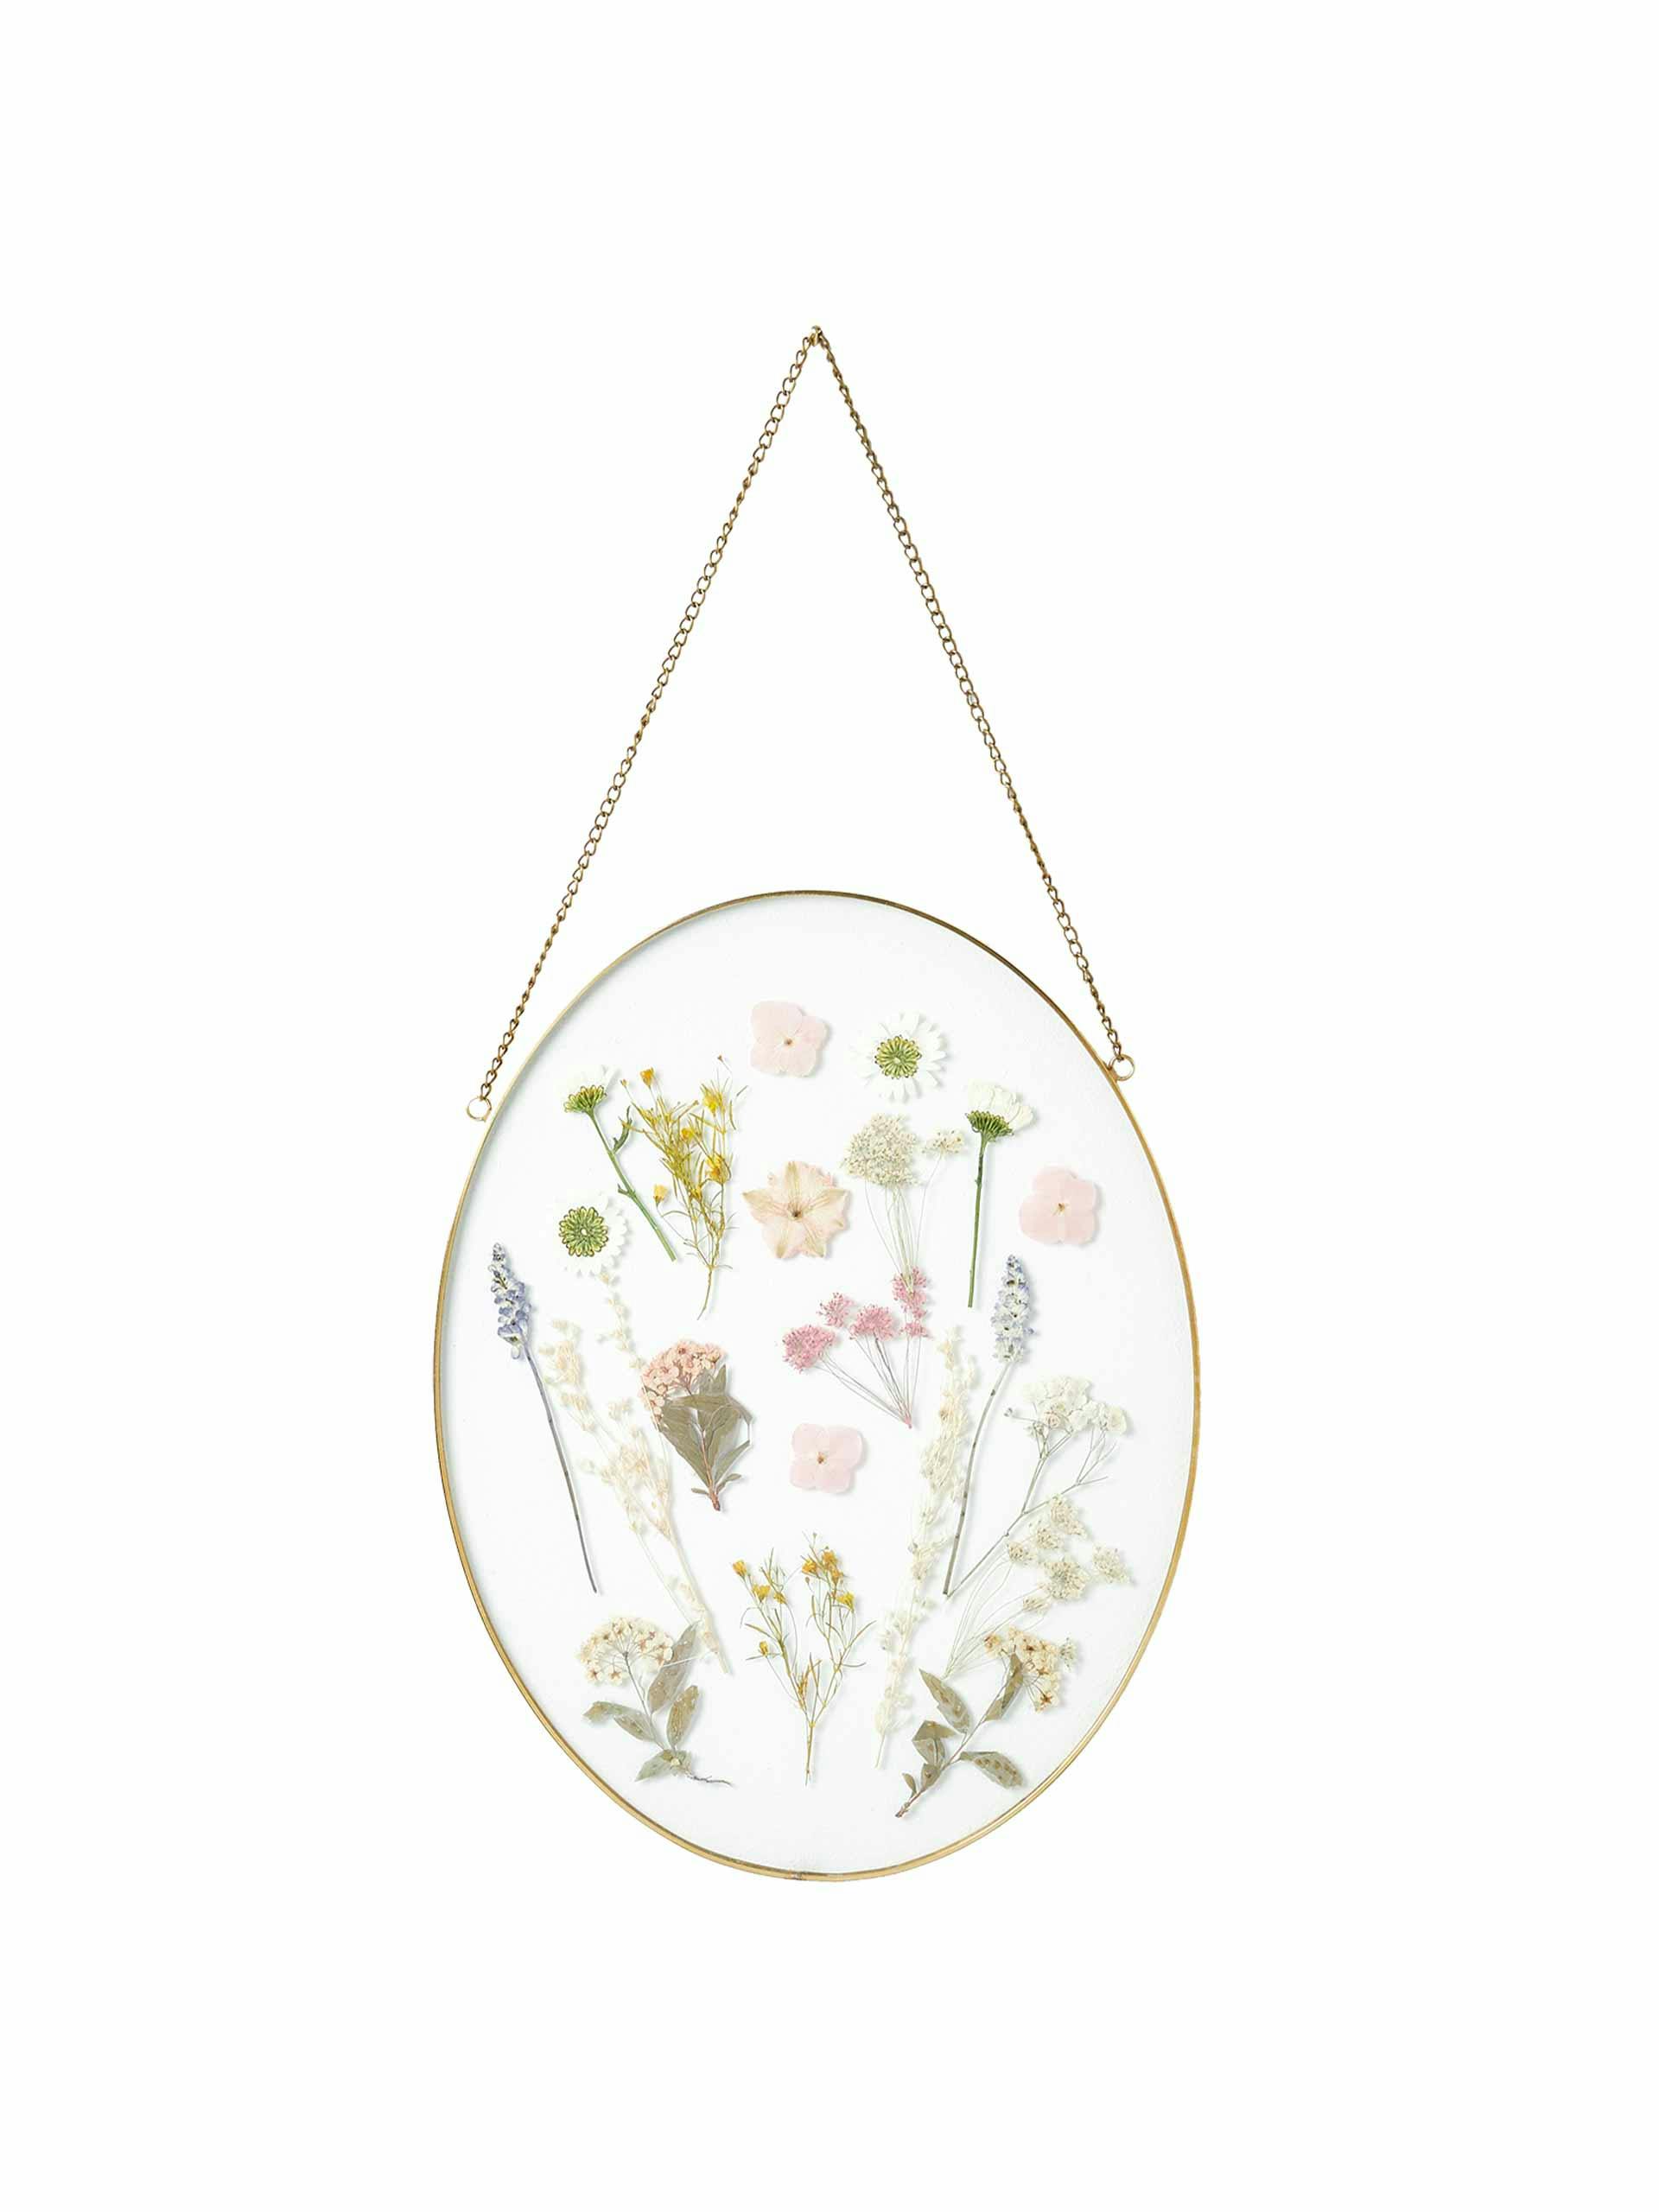 Gold and glass oval dried flower wall hanging